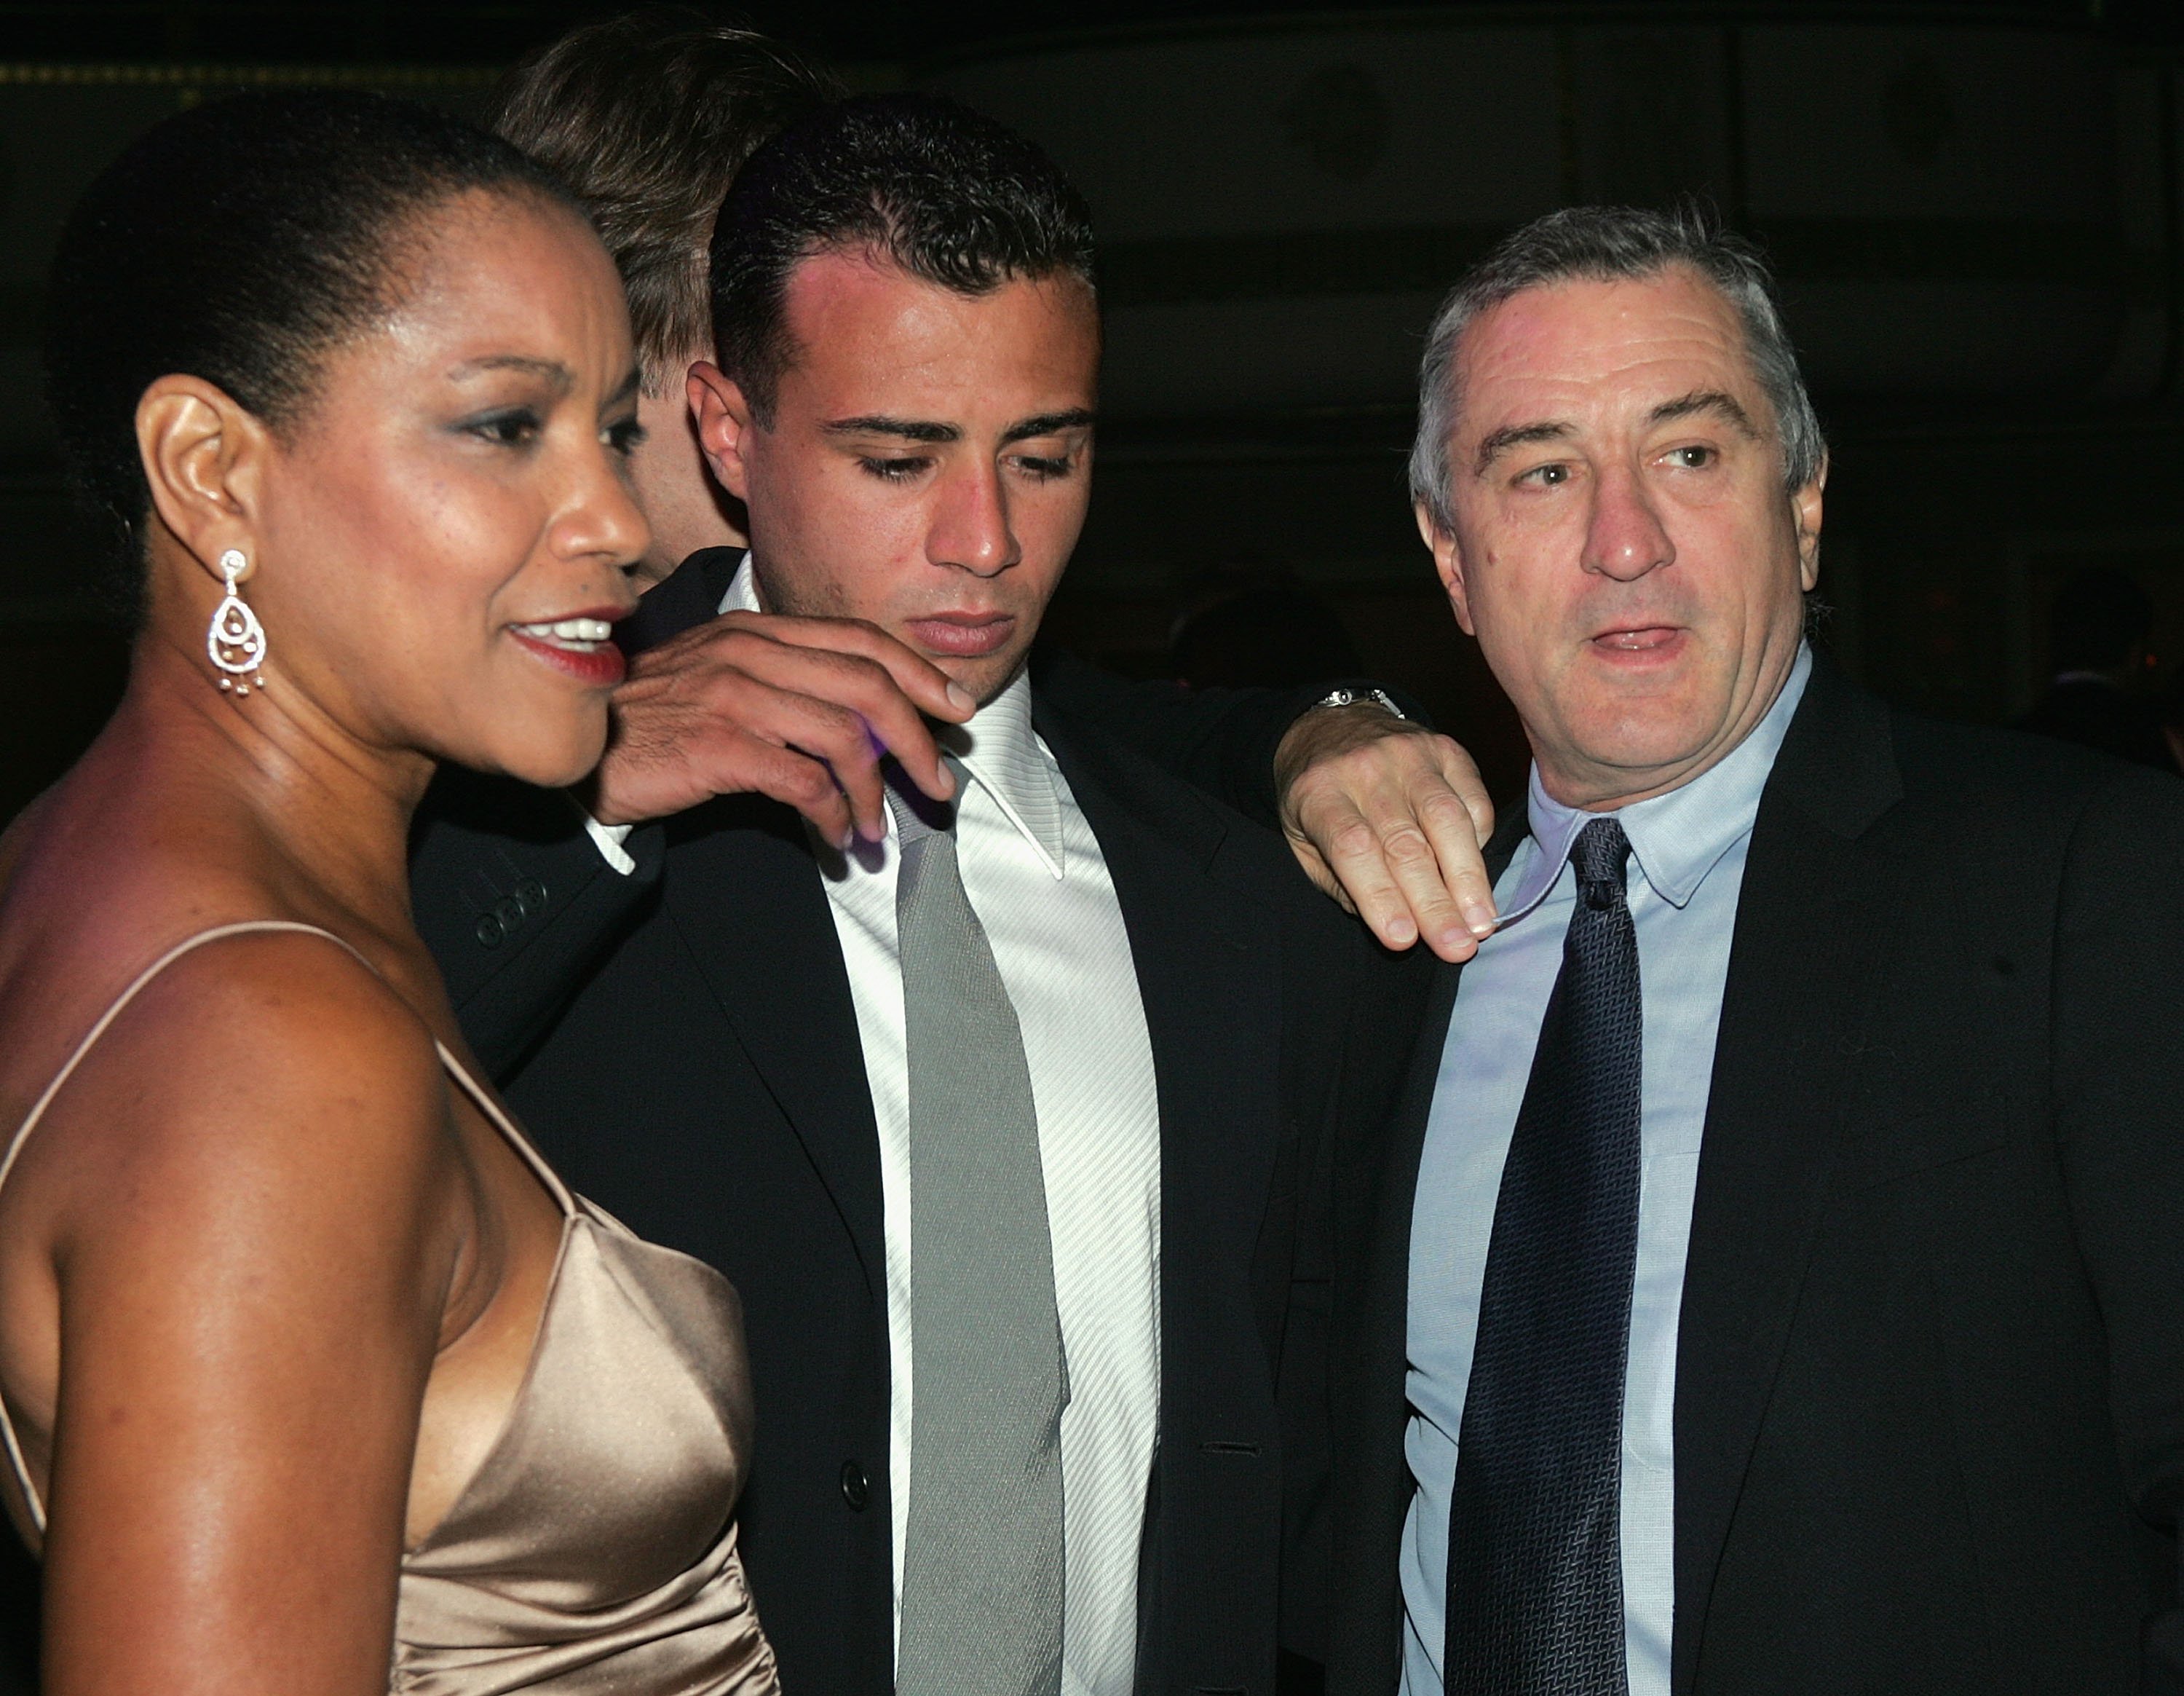 Robert De Niro with Grace Hightower and his son Raphael DeNiro during the cocktail party for the 5th Annual Directors Guild Of America Honors at the Waldorf Astoria Hotel September 29, 2004 in New York City. / Source: Getty Images